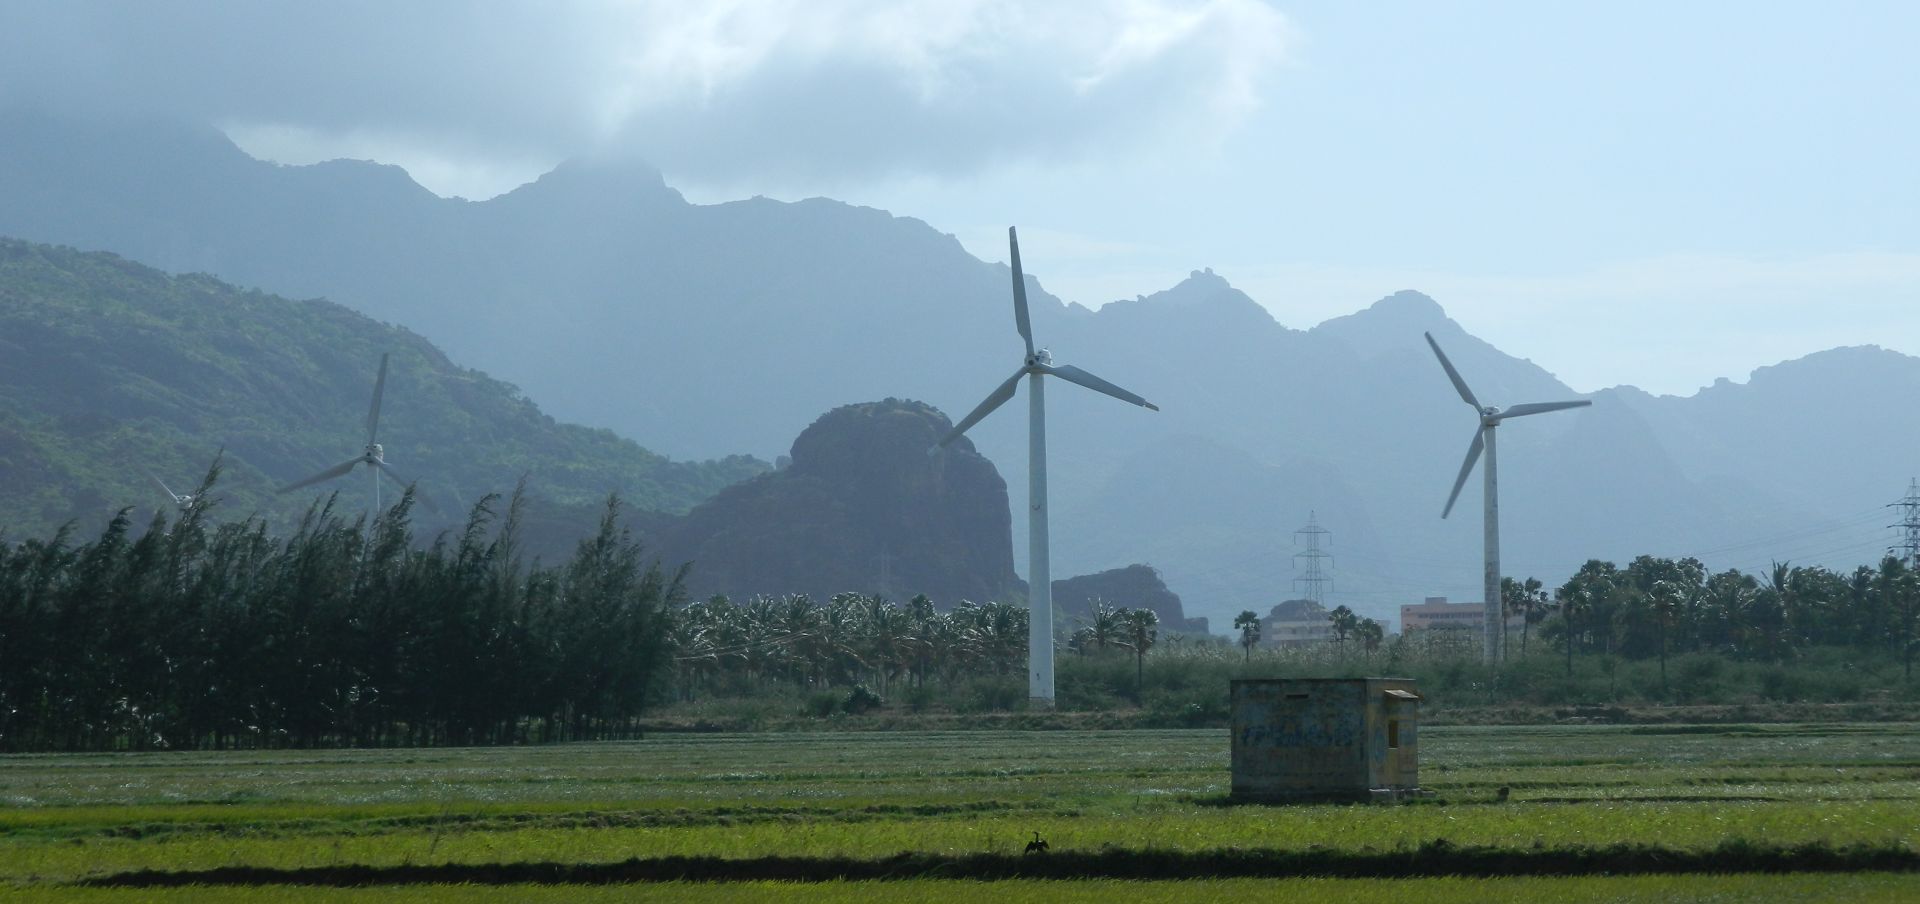 Windmills in a green field with low clouds and mountains in the background